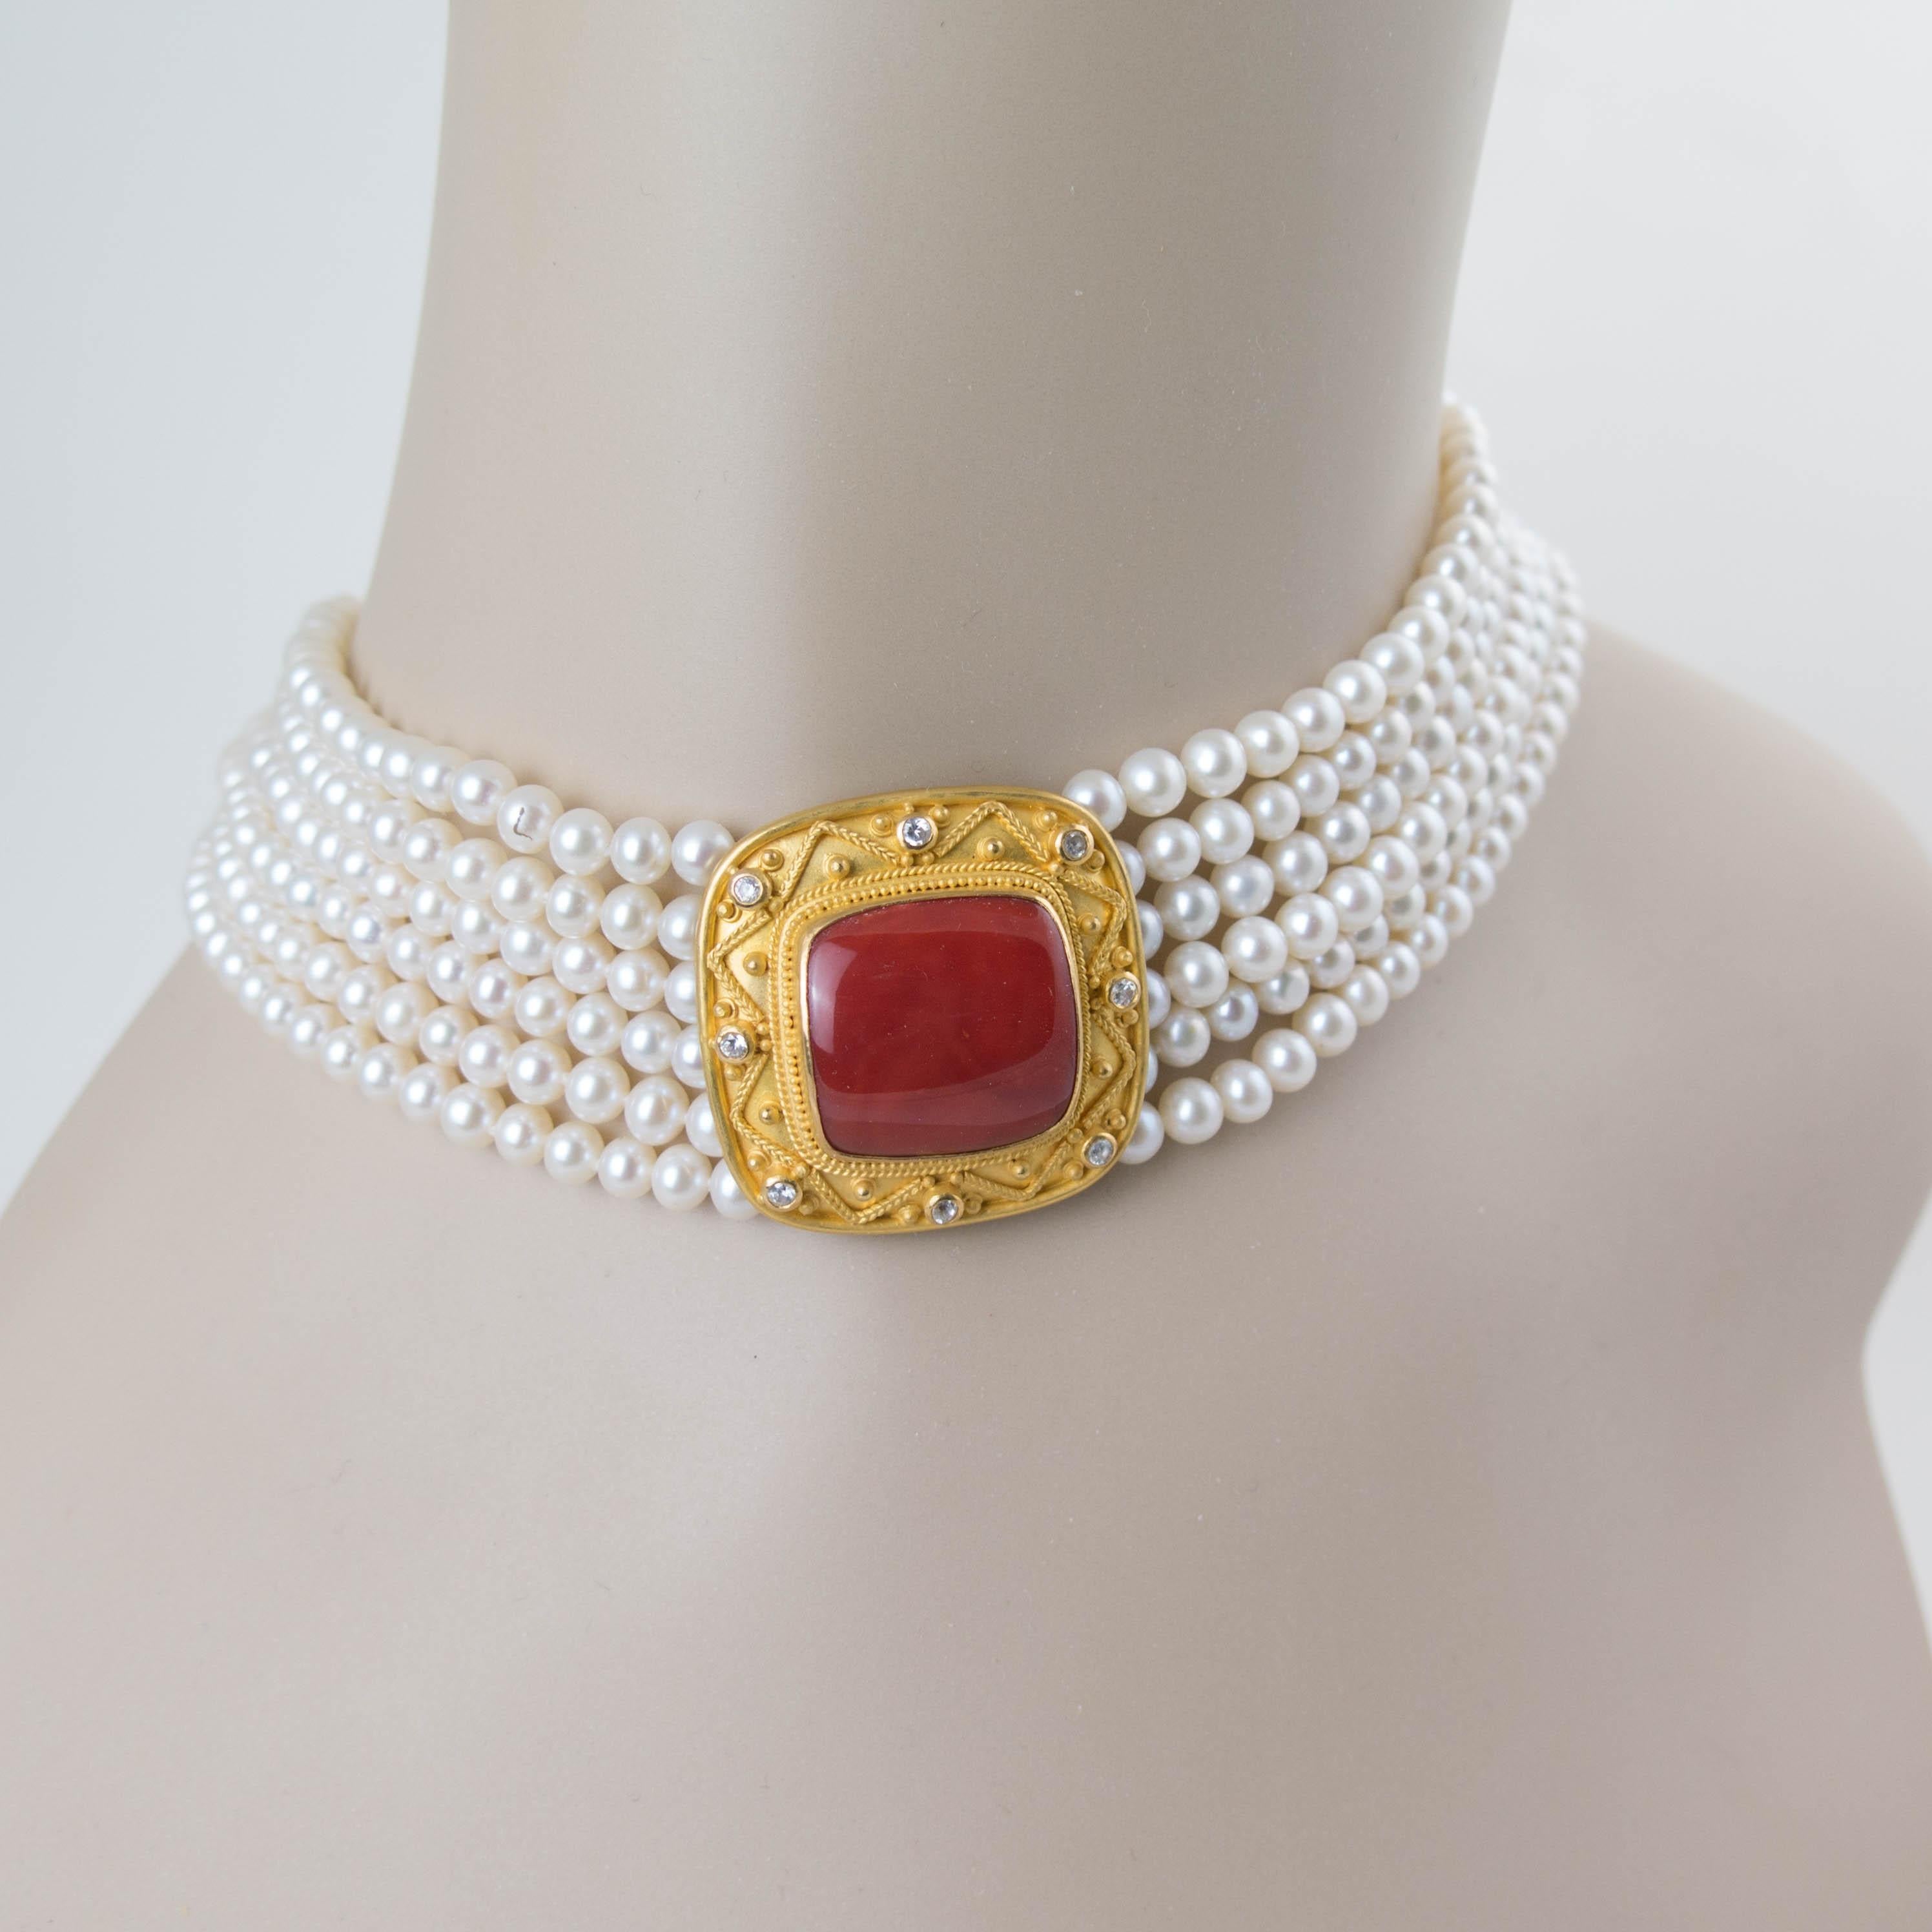 Carolyn Tyler 'Corinna Choker' White Pearl and Red Coral Necklace in 22k Gold For Sale 4